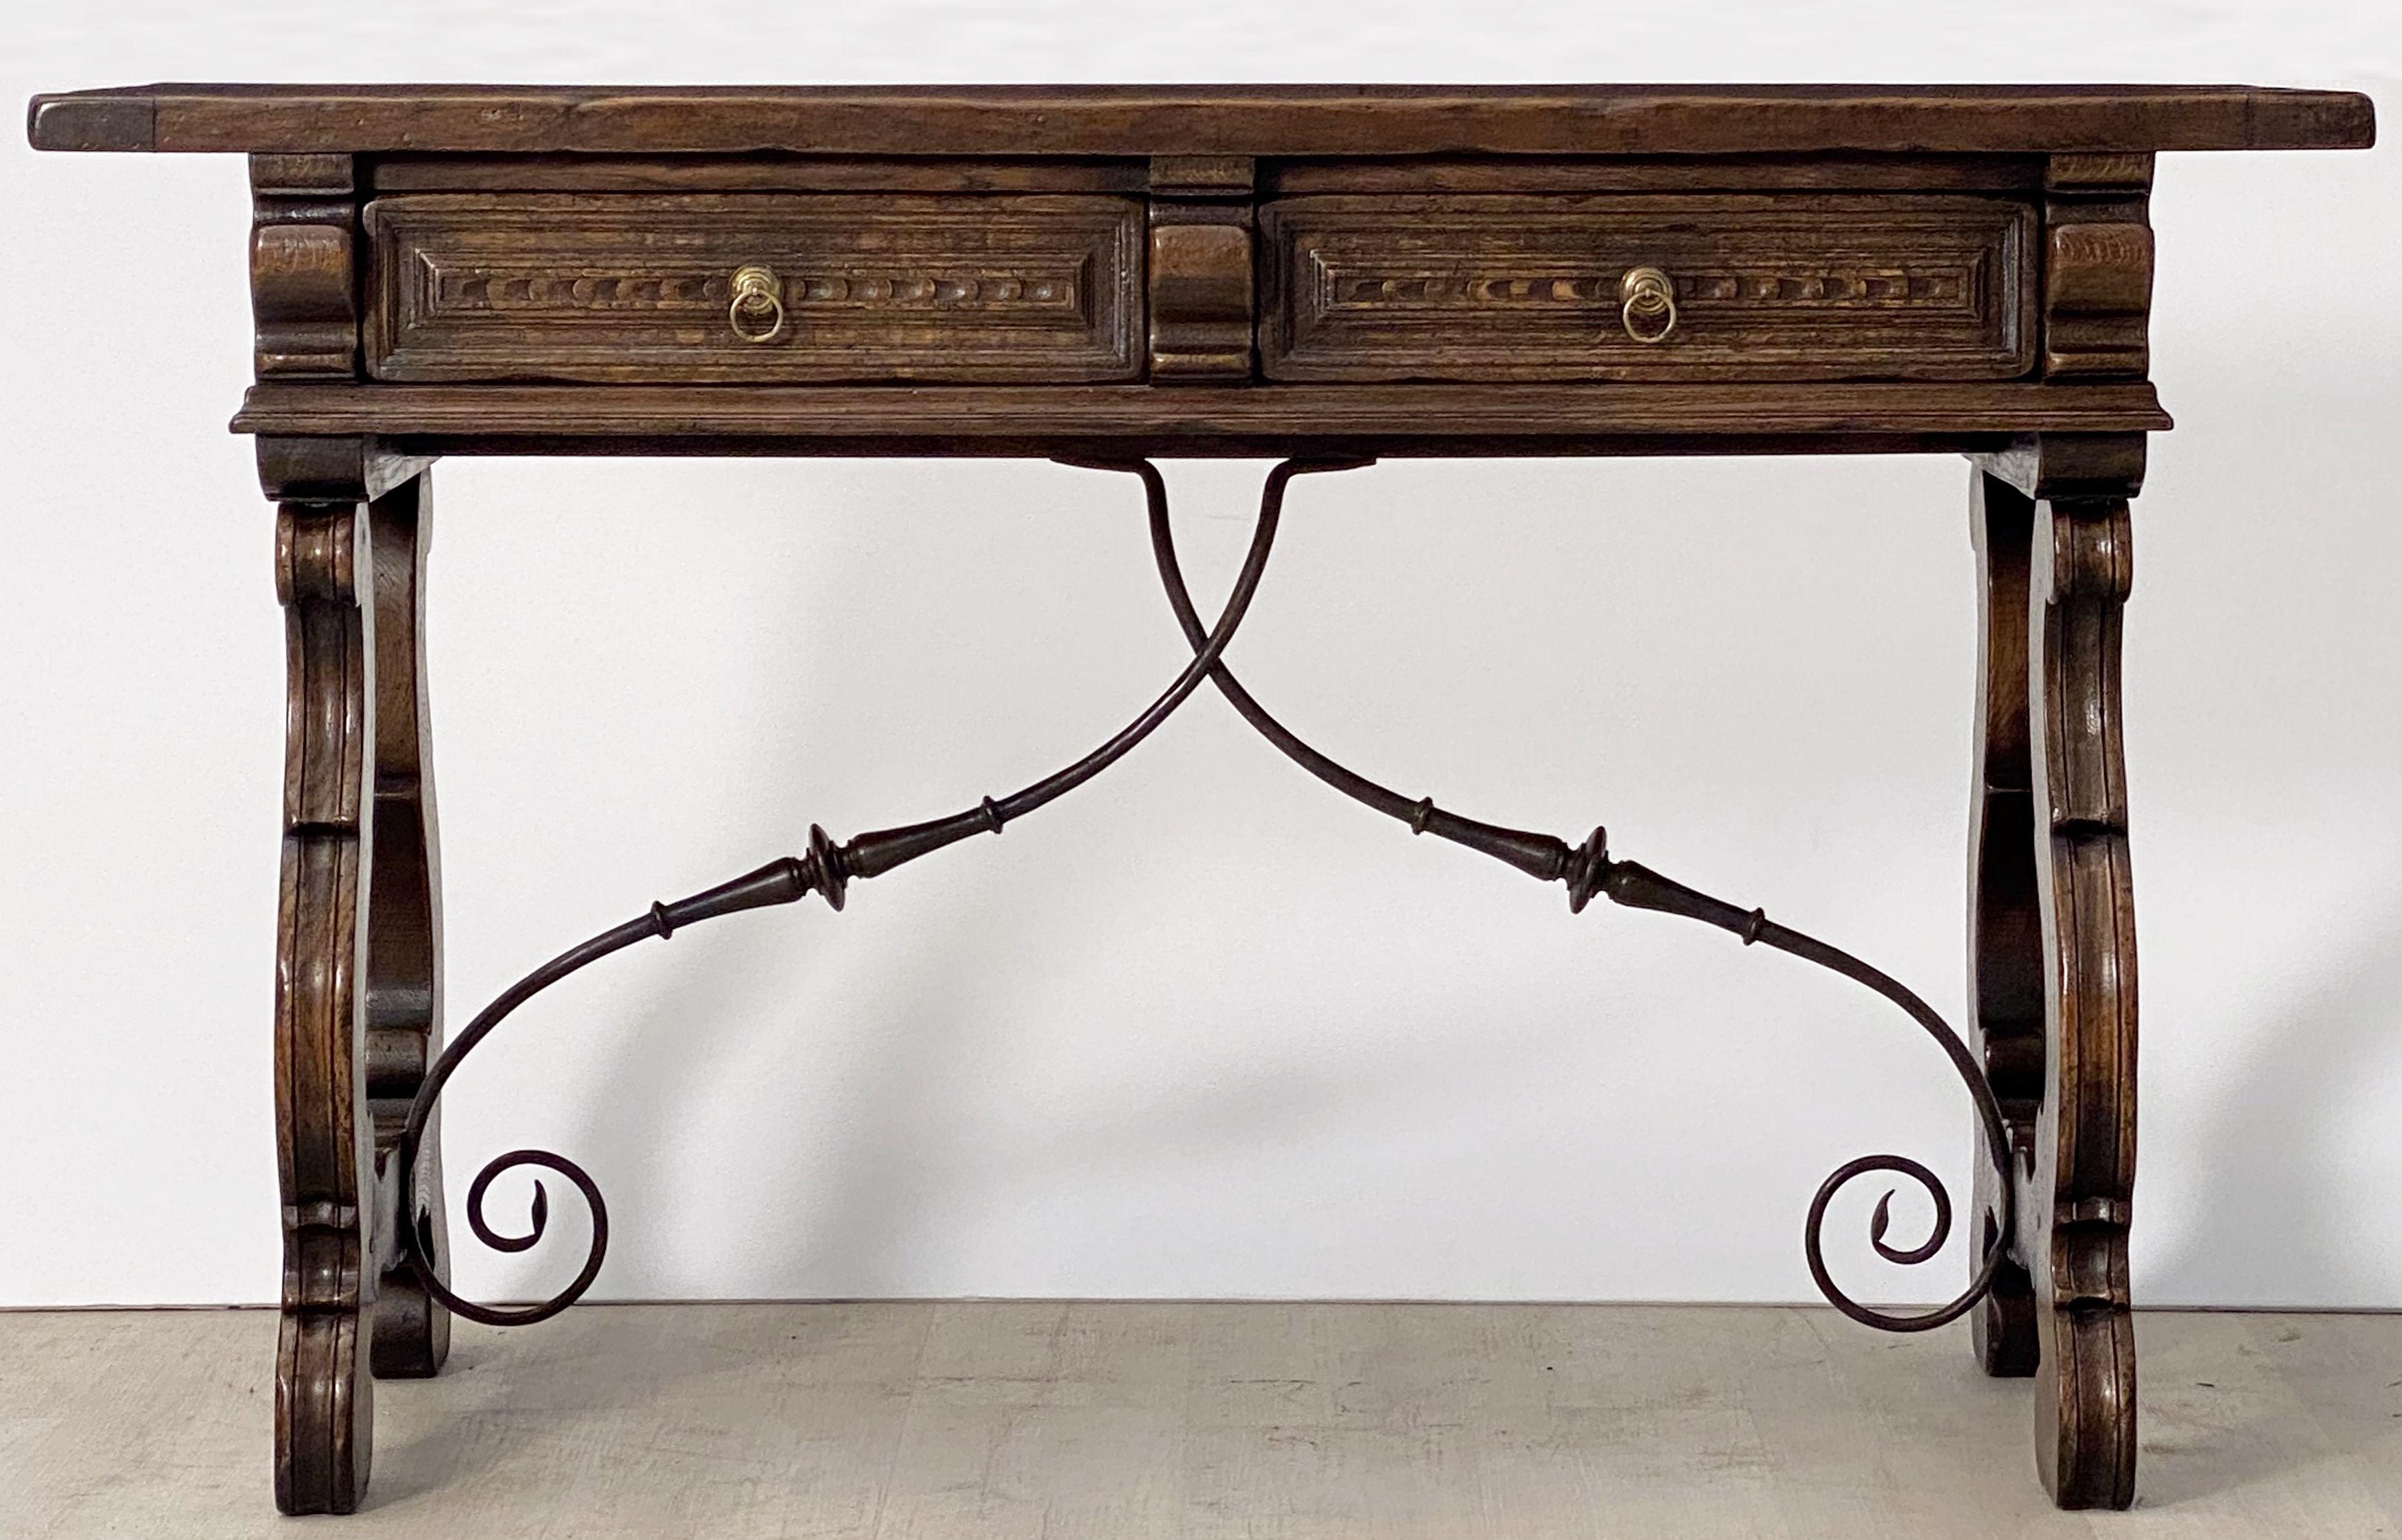 A handsome Spanish console table or buffet server of oak featuring a rectangular plank top over a frieze of two drawers, with brass pulls, and standing on turned wood supports with wrought ironwork braces in a cross-bar design.